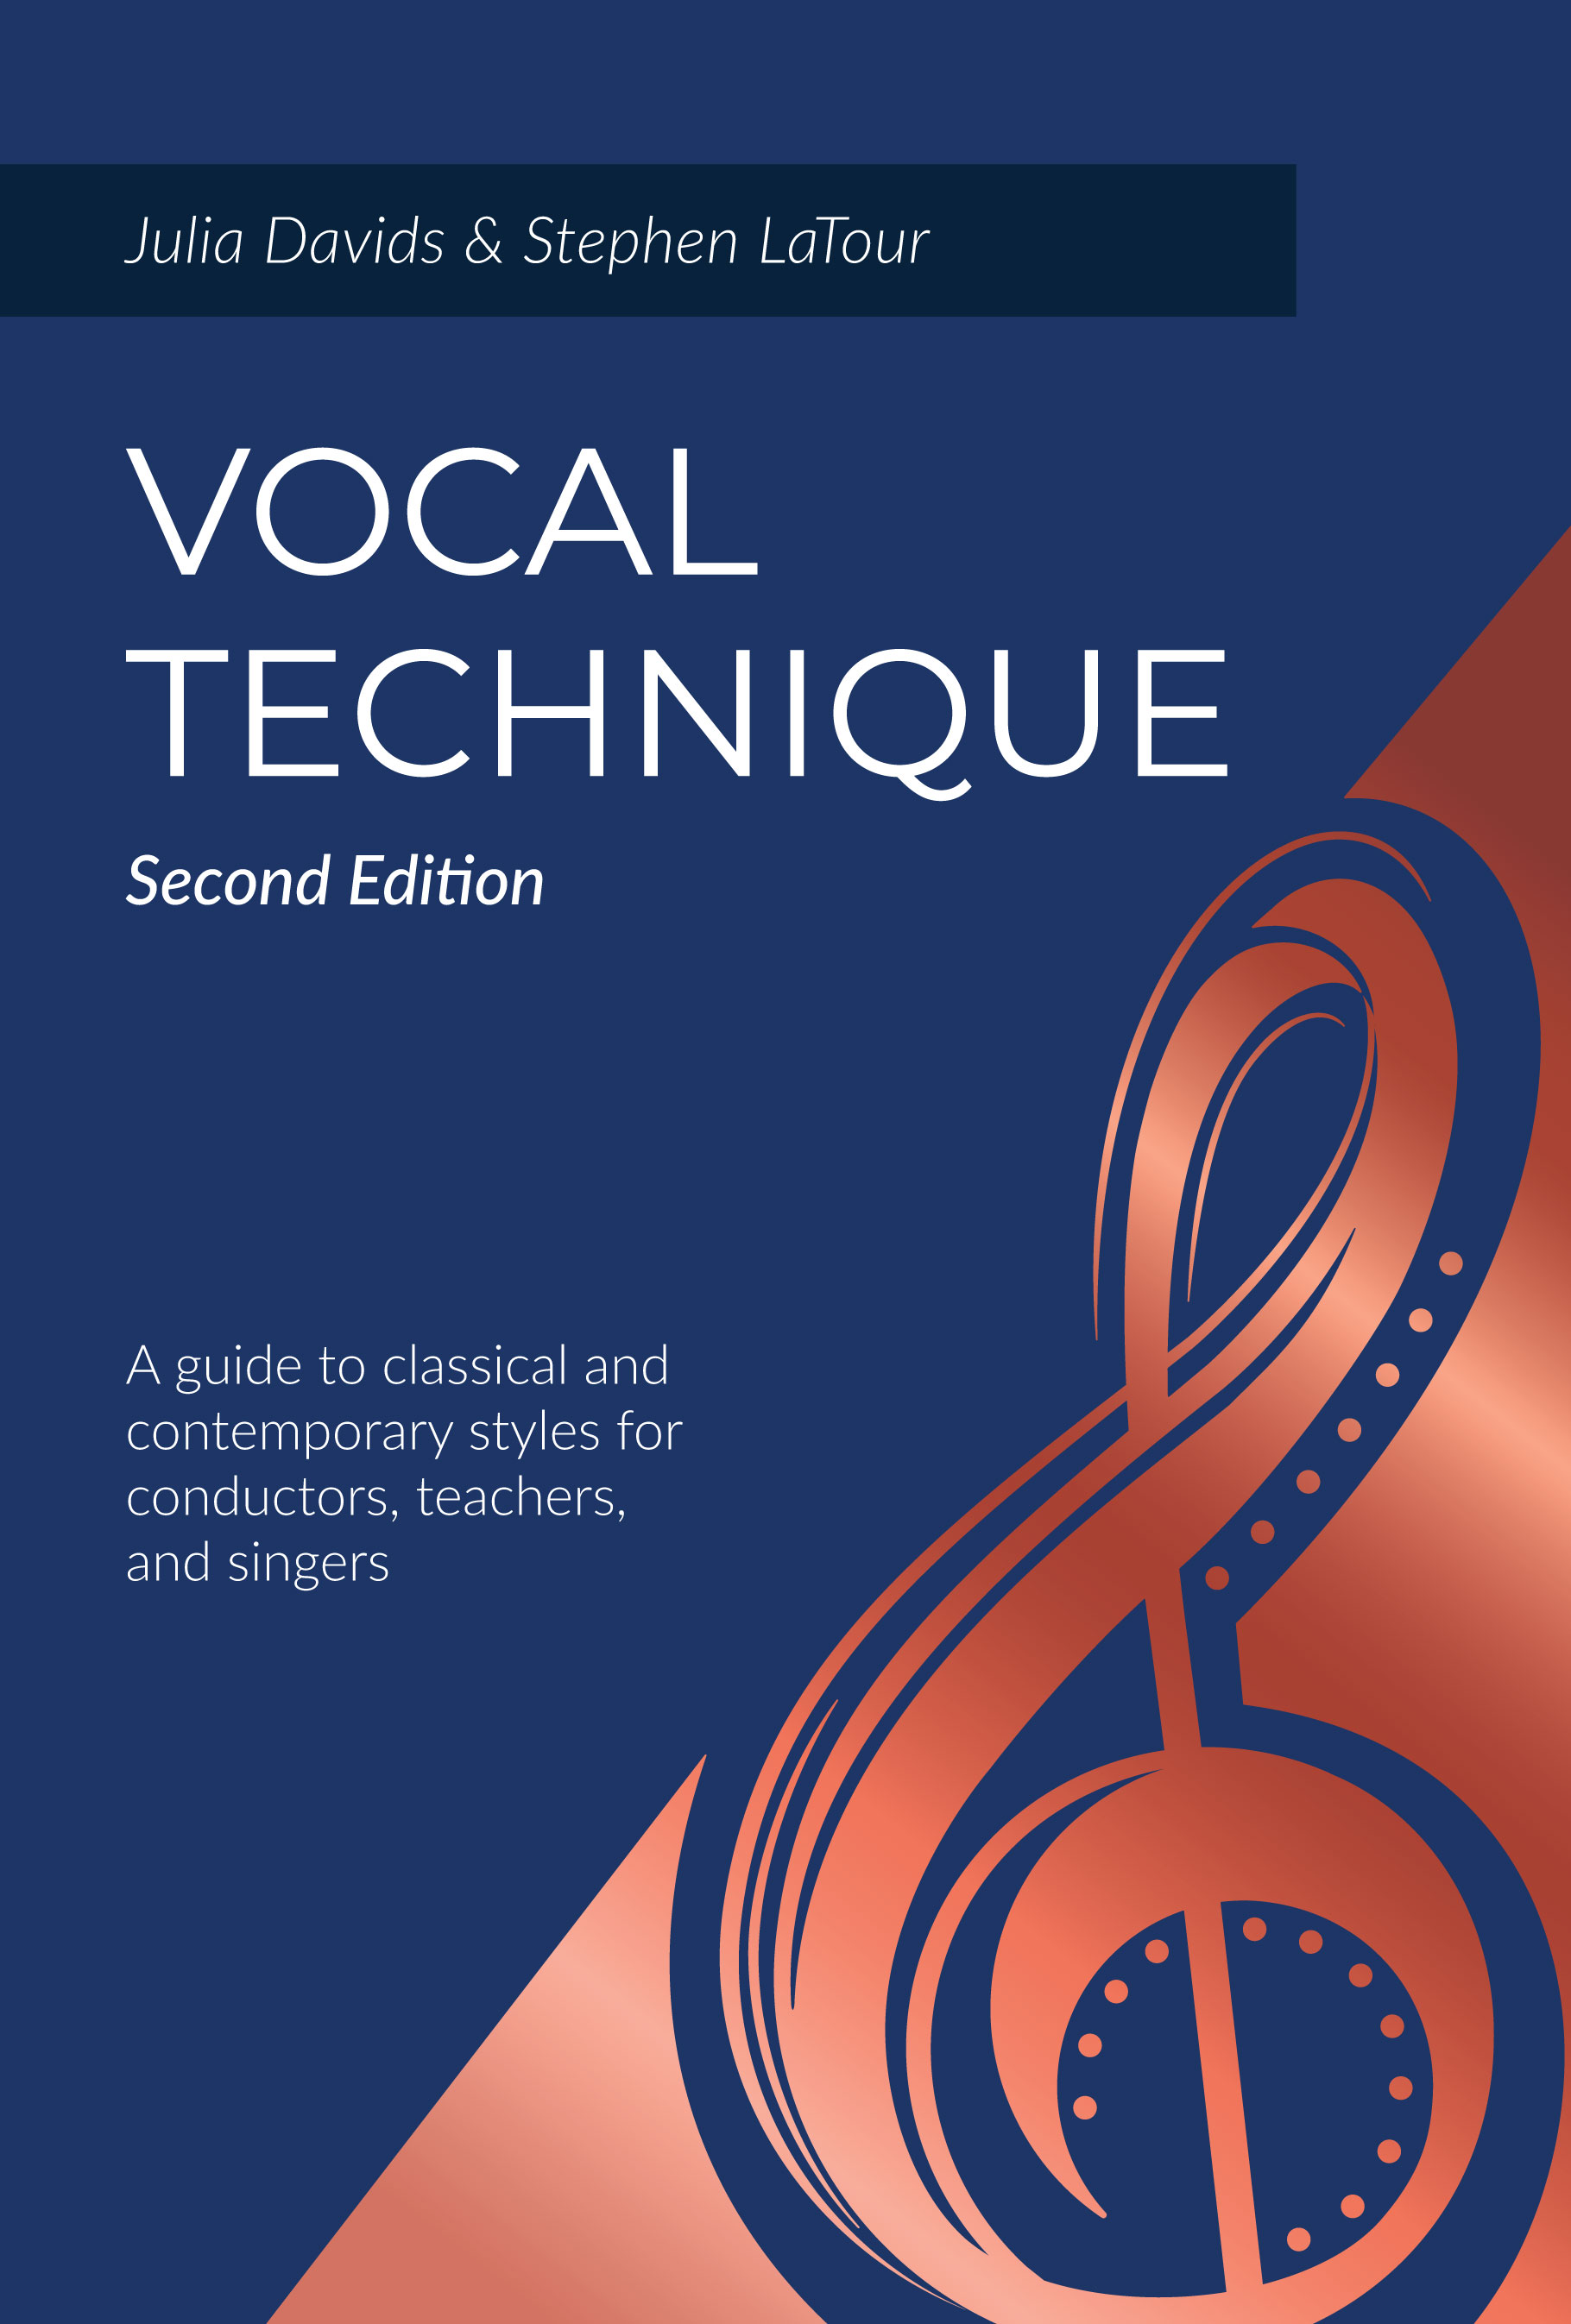 Vocal Technique: A Guide to Classical and Contemporary Styles for Conductors, Teachers, and Singers by Julia  Davids, Stephen  LaTour